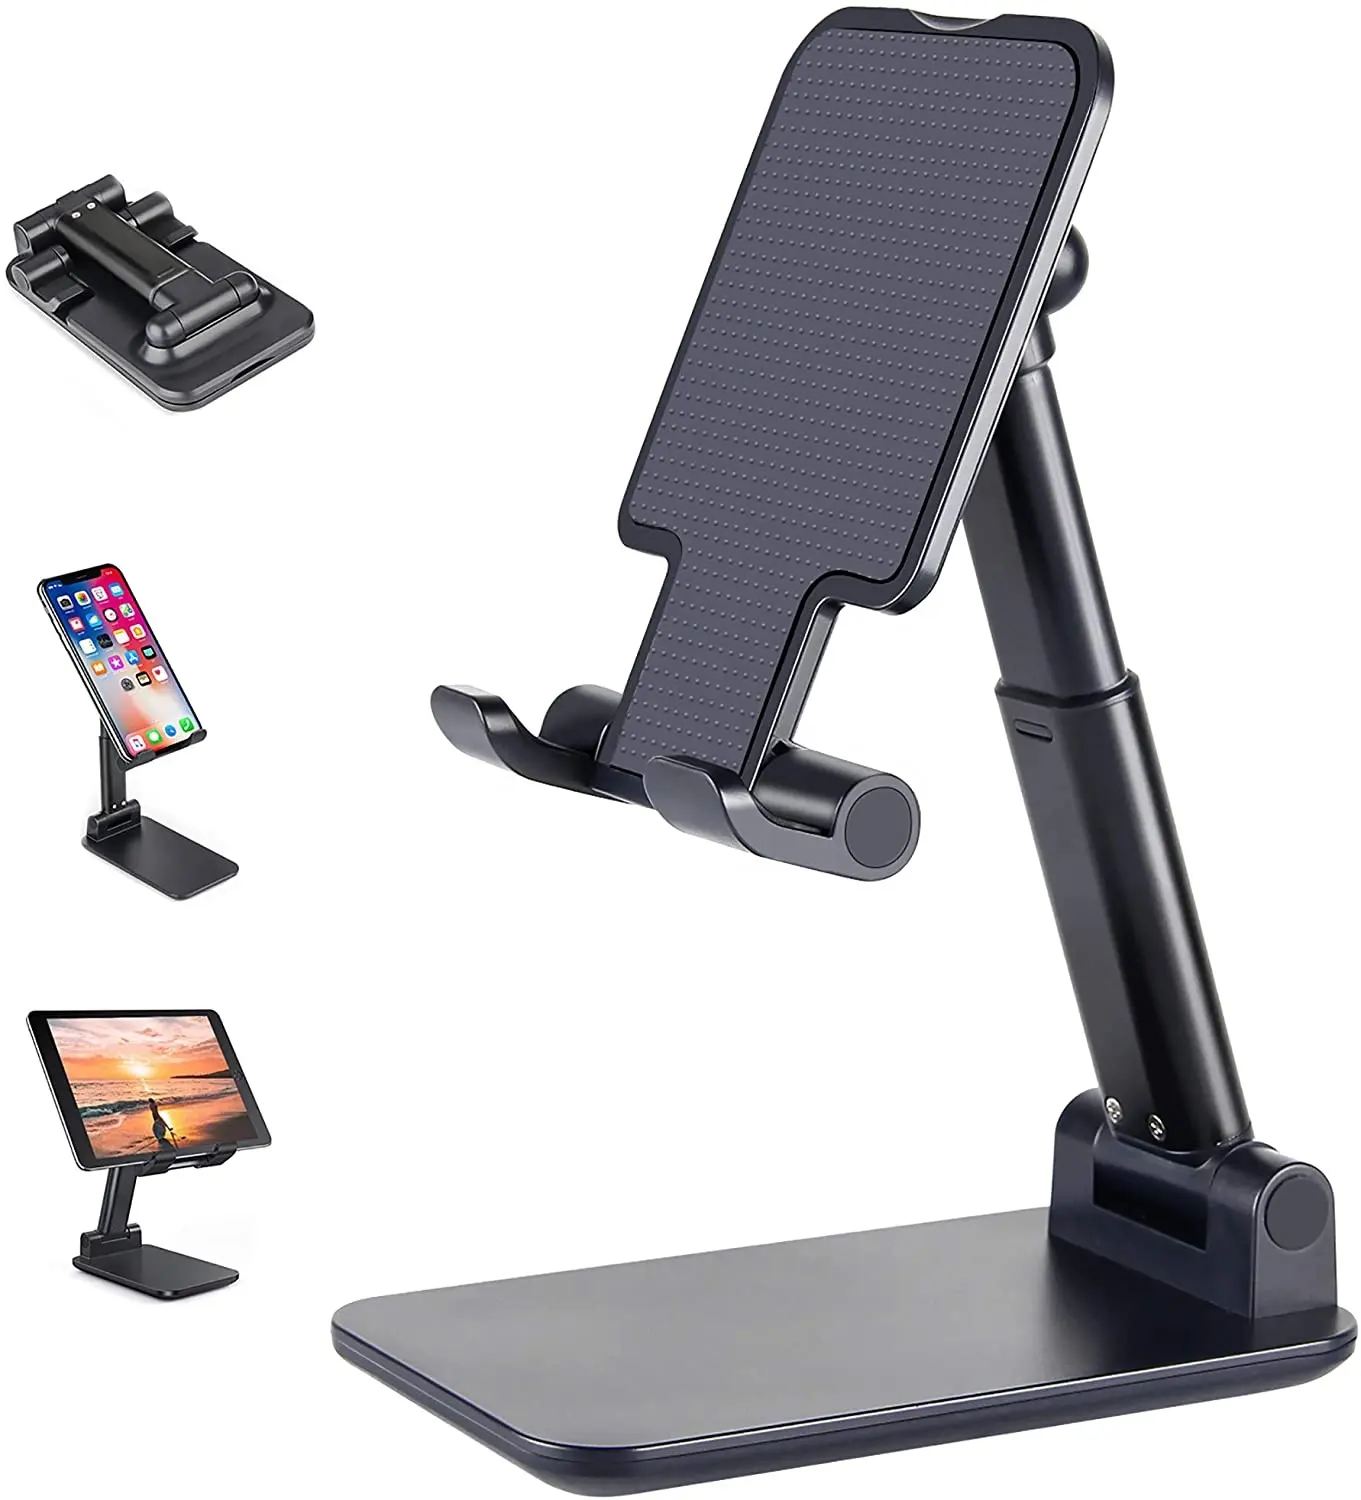 Cell Phone Stand Mini Mobile Phone Holder Angle Height Adjustable for Desk Foldable for All Mobile Phone/iPad/Kindle/Tablet